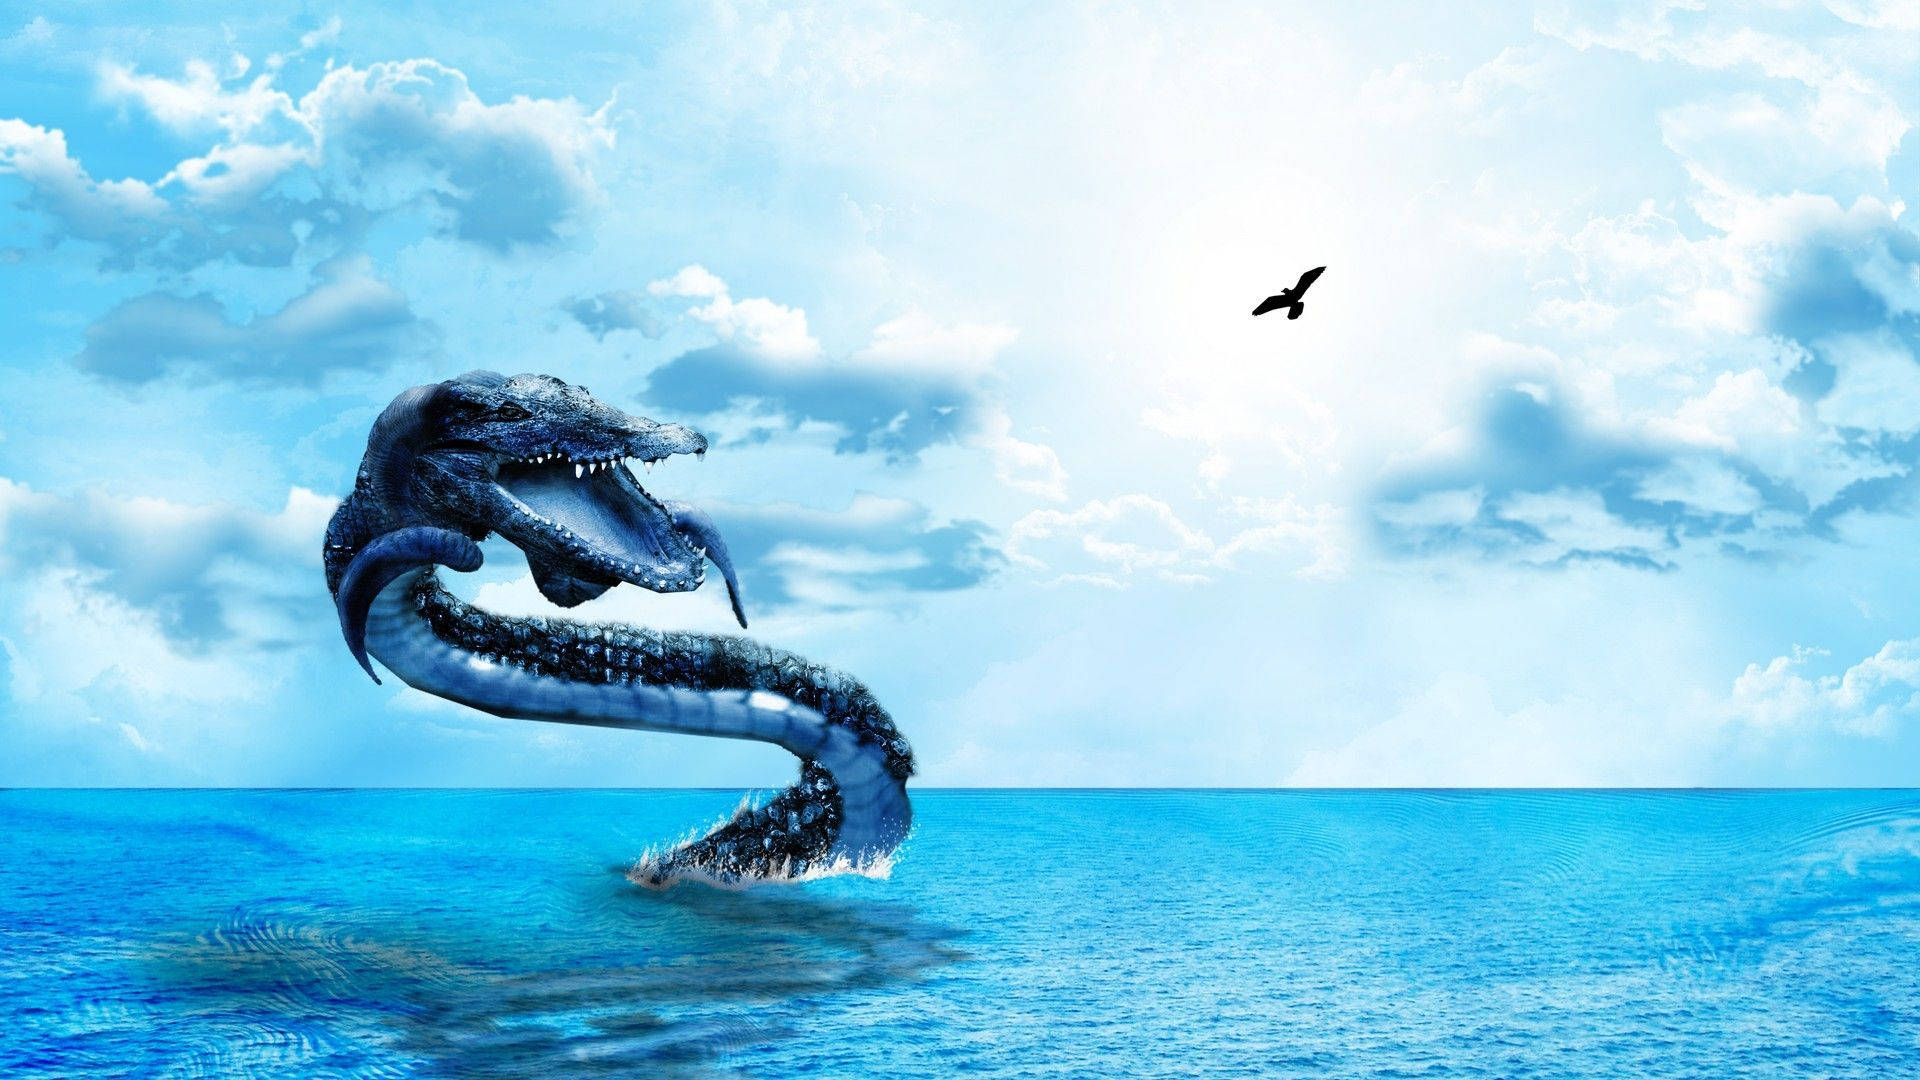 A Snake Is Swimming In The Ocean With A Bird Flying Above It Background